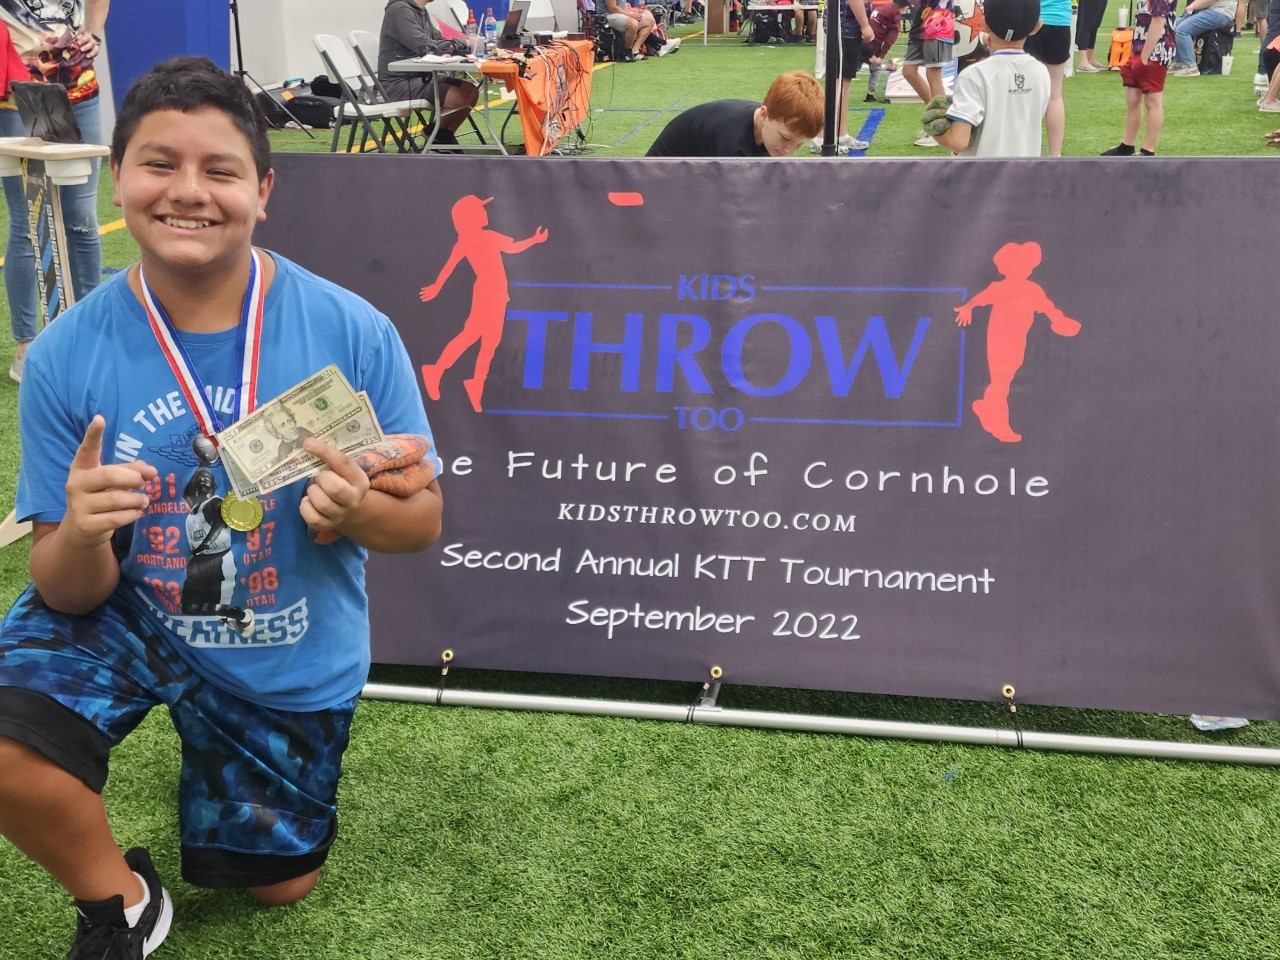 I wanted to share that 8th grader Joel Gonzalez attended the Kids Throw Too cornhole tournament in St. Louis, MO over the weekend,  along with the Brighton High School Cornhole club. He met and played with several professional players. He placed 1st in Intermediate Singles and 3rd in Intermediate Doubles. This tournament had kids from all over the US and it was an amazing accomplishment.  Thanks for your time, Tiffany Blevins